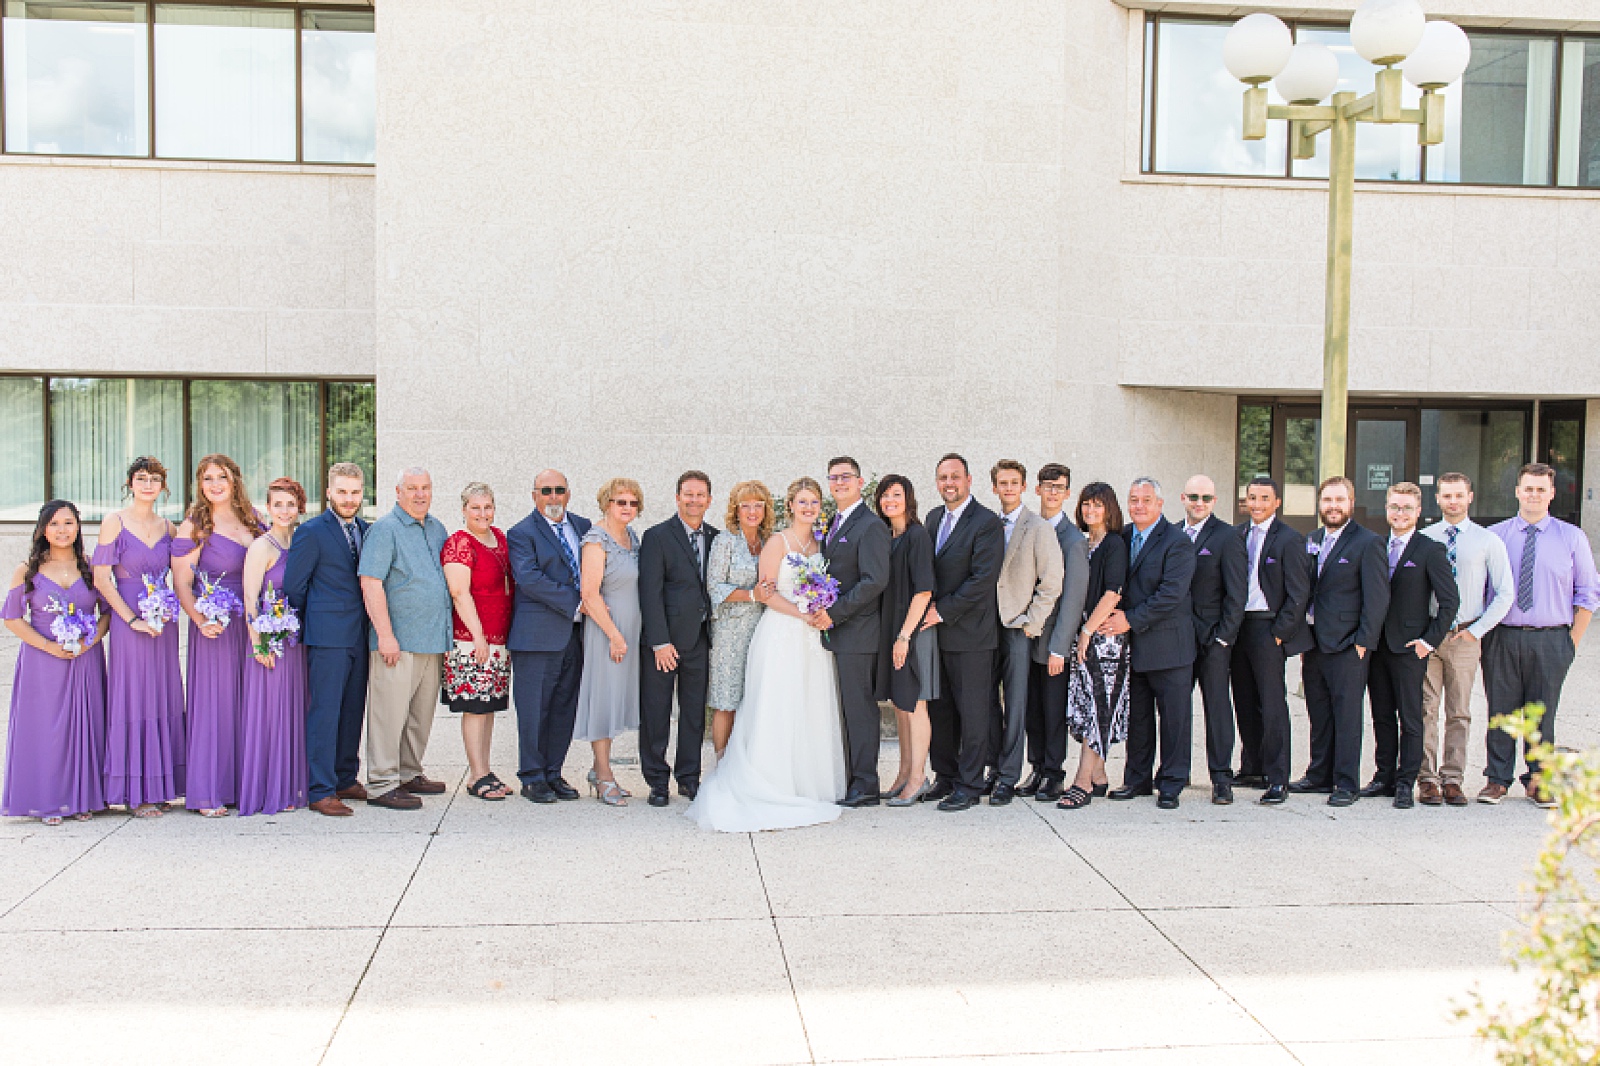 family photos on wedding day with wedding party